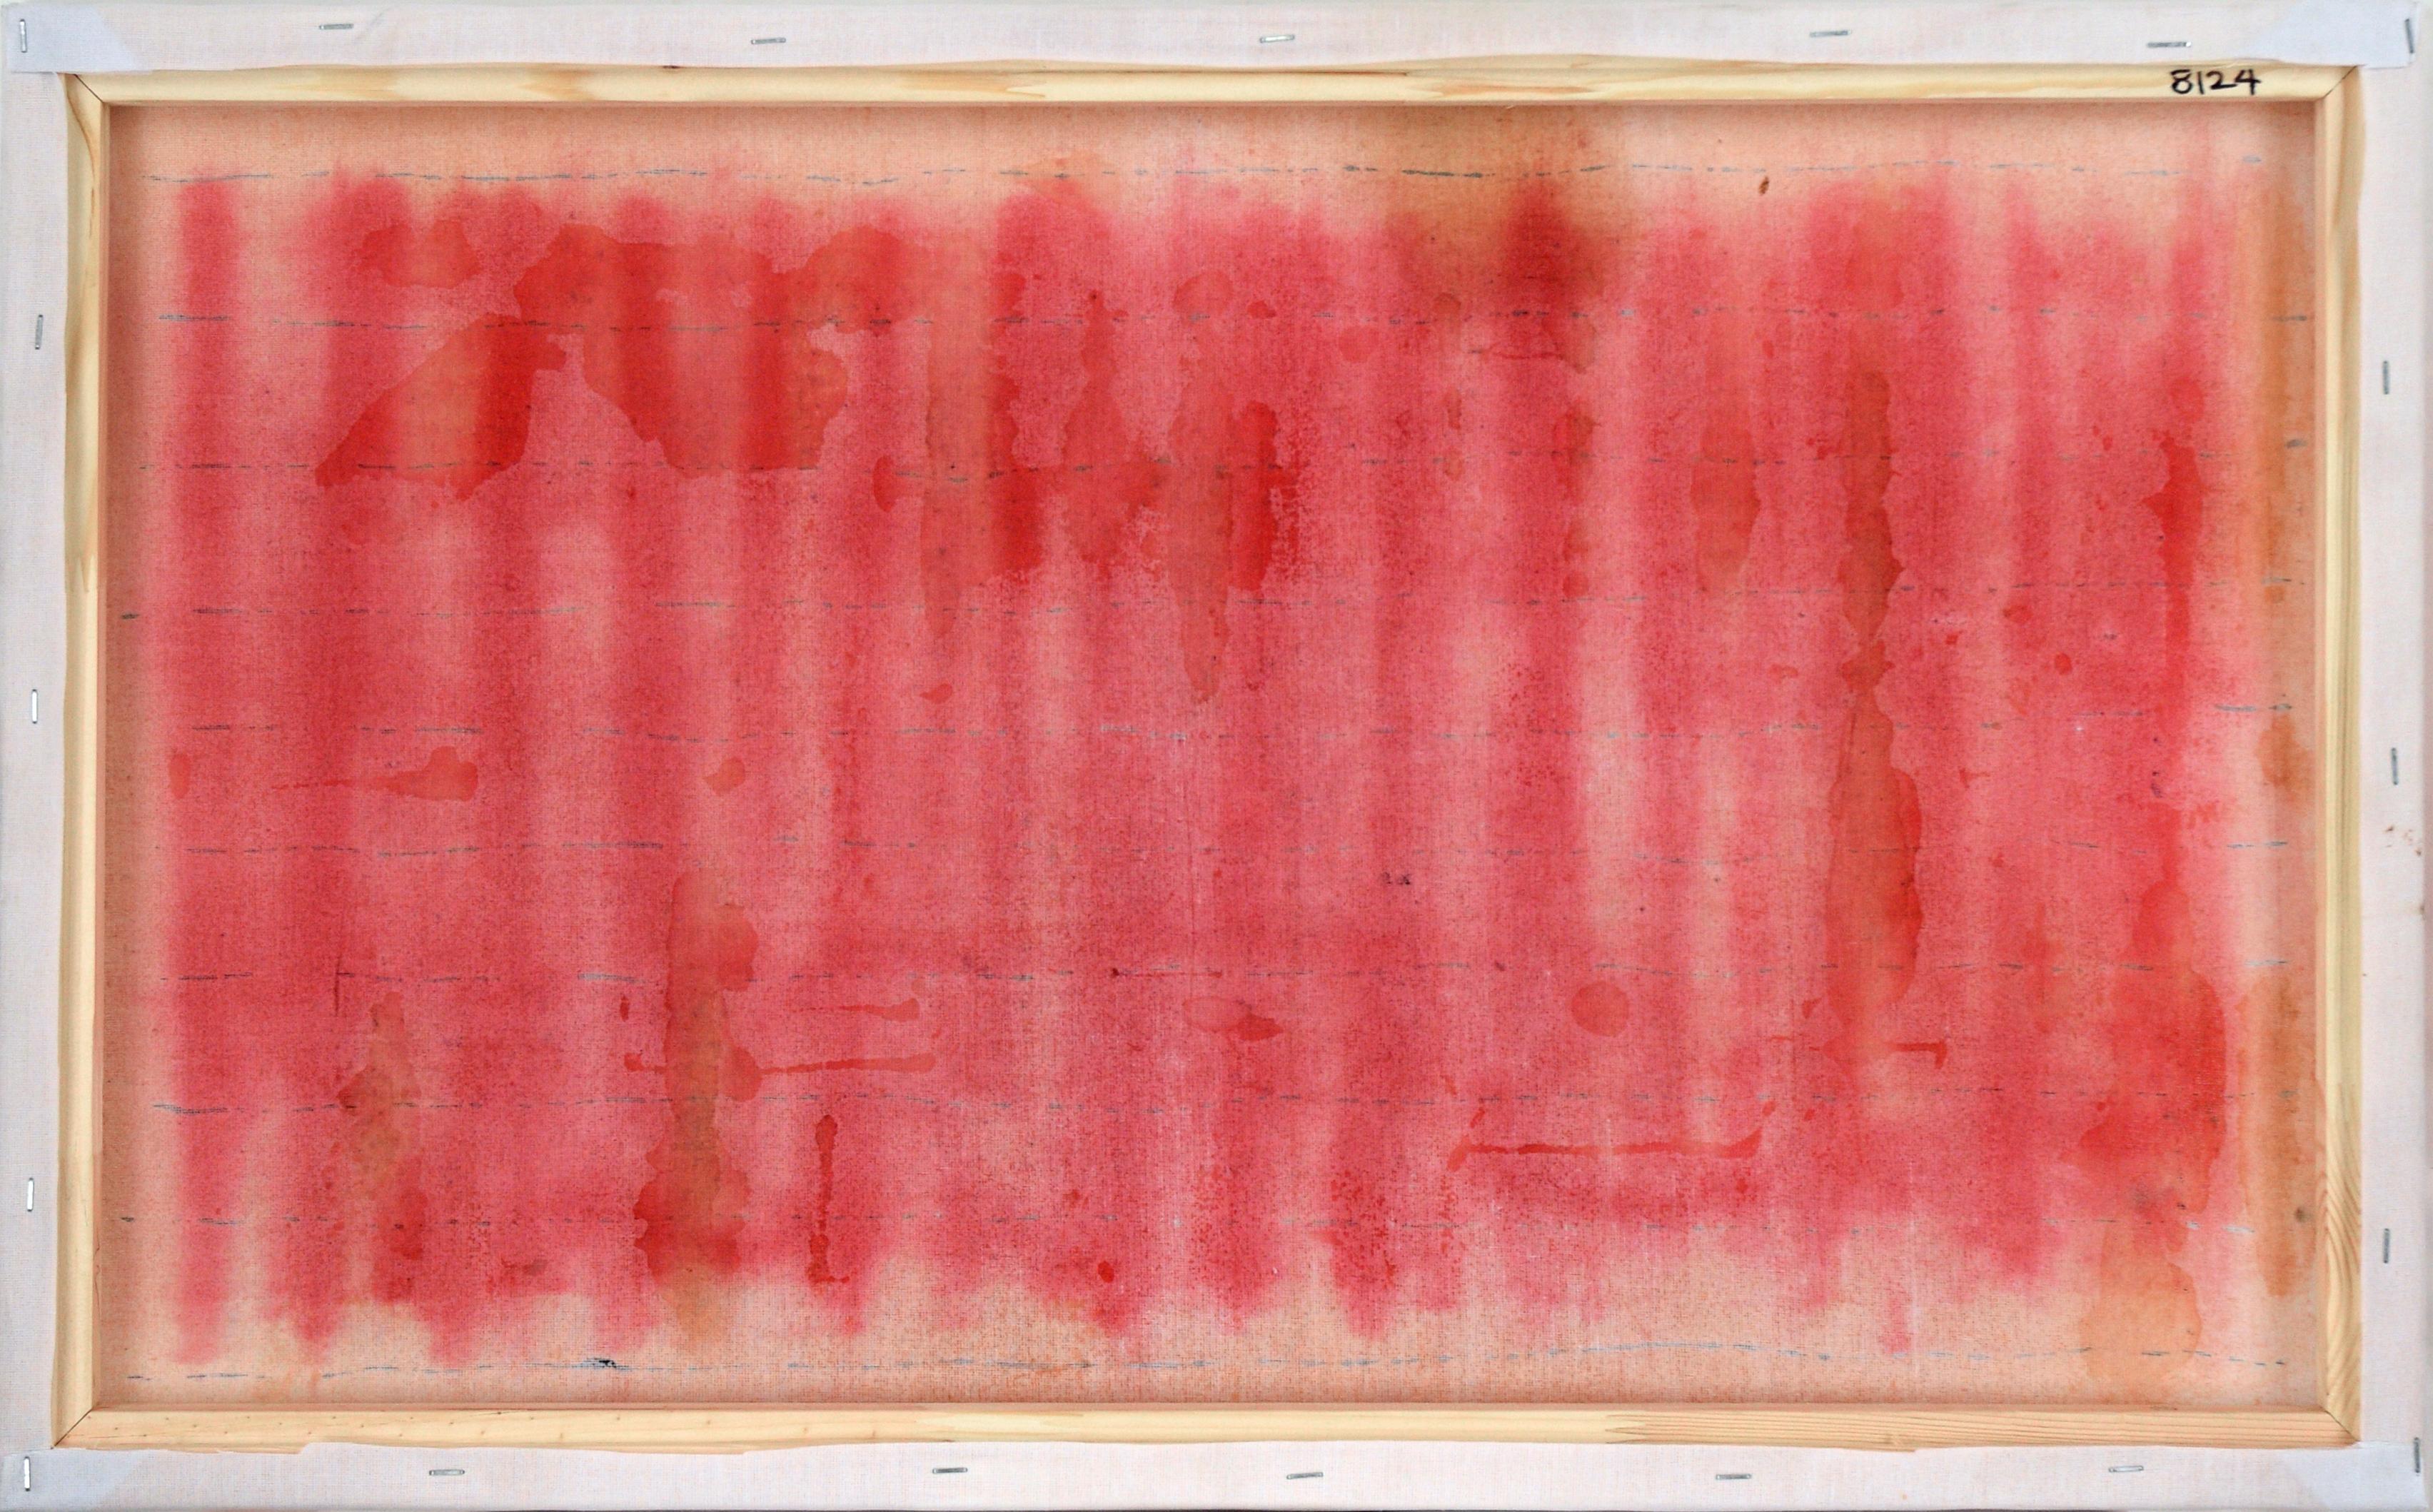 Black Lines Across a Red Field - Abstract Composition on Starched Linen 5